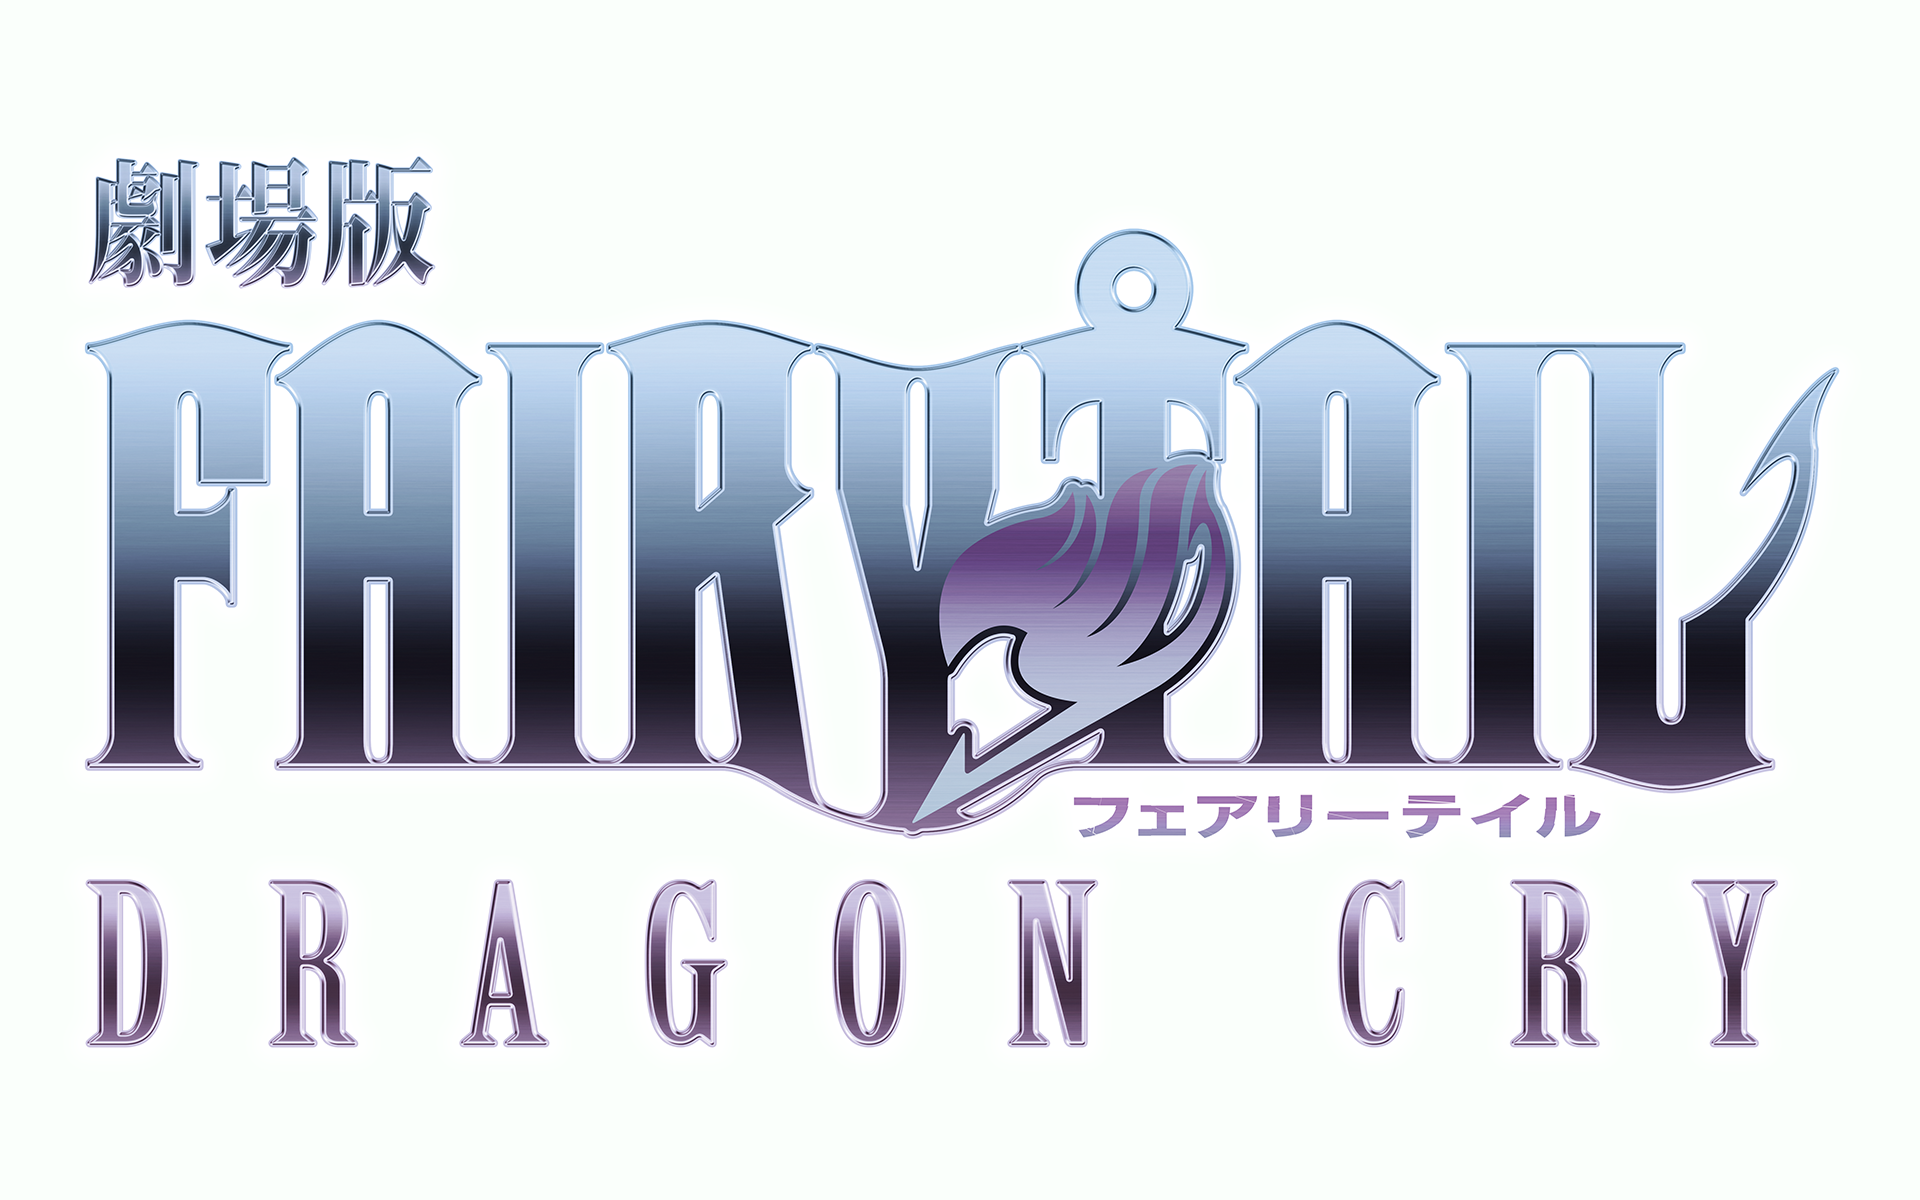 Fairy Tail Movie 2: Dragon Cry HD wallpapers, Desktop wallpaper - most viewed